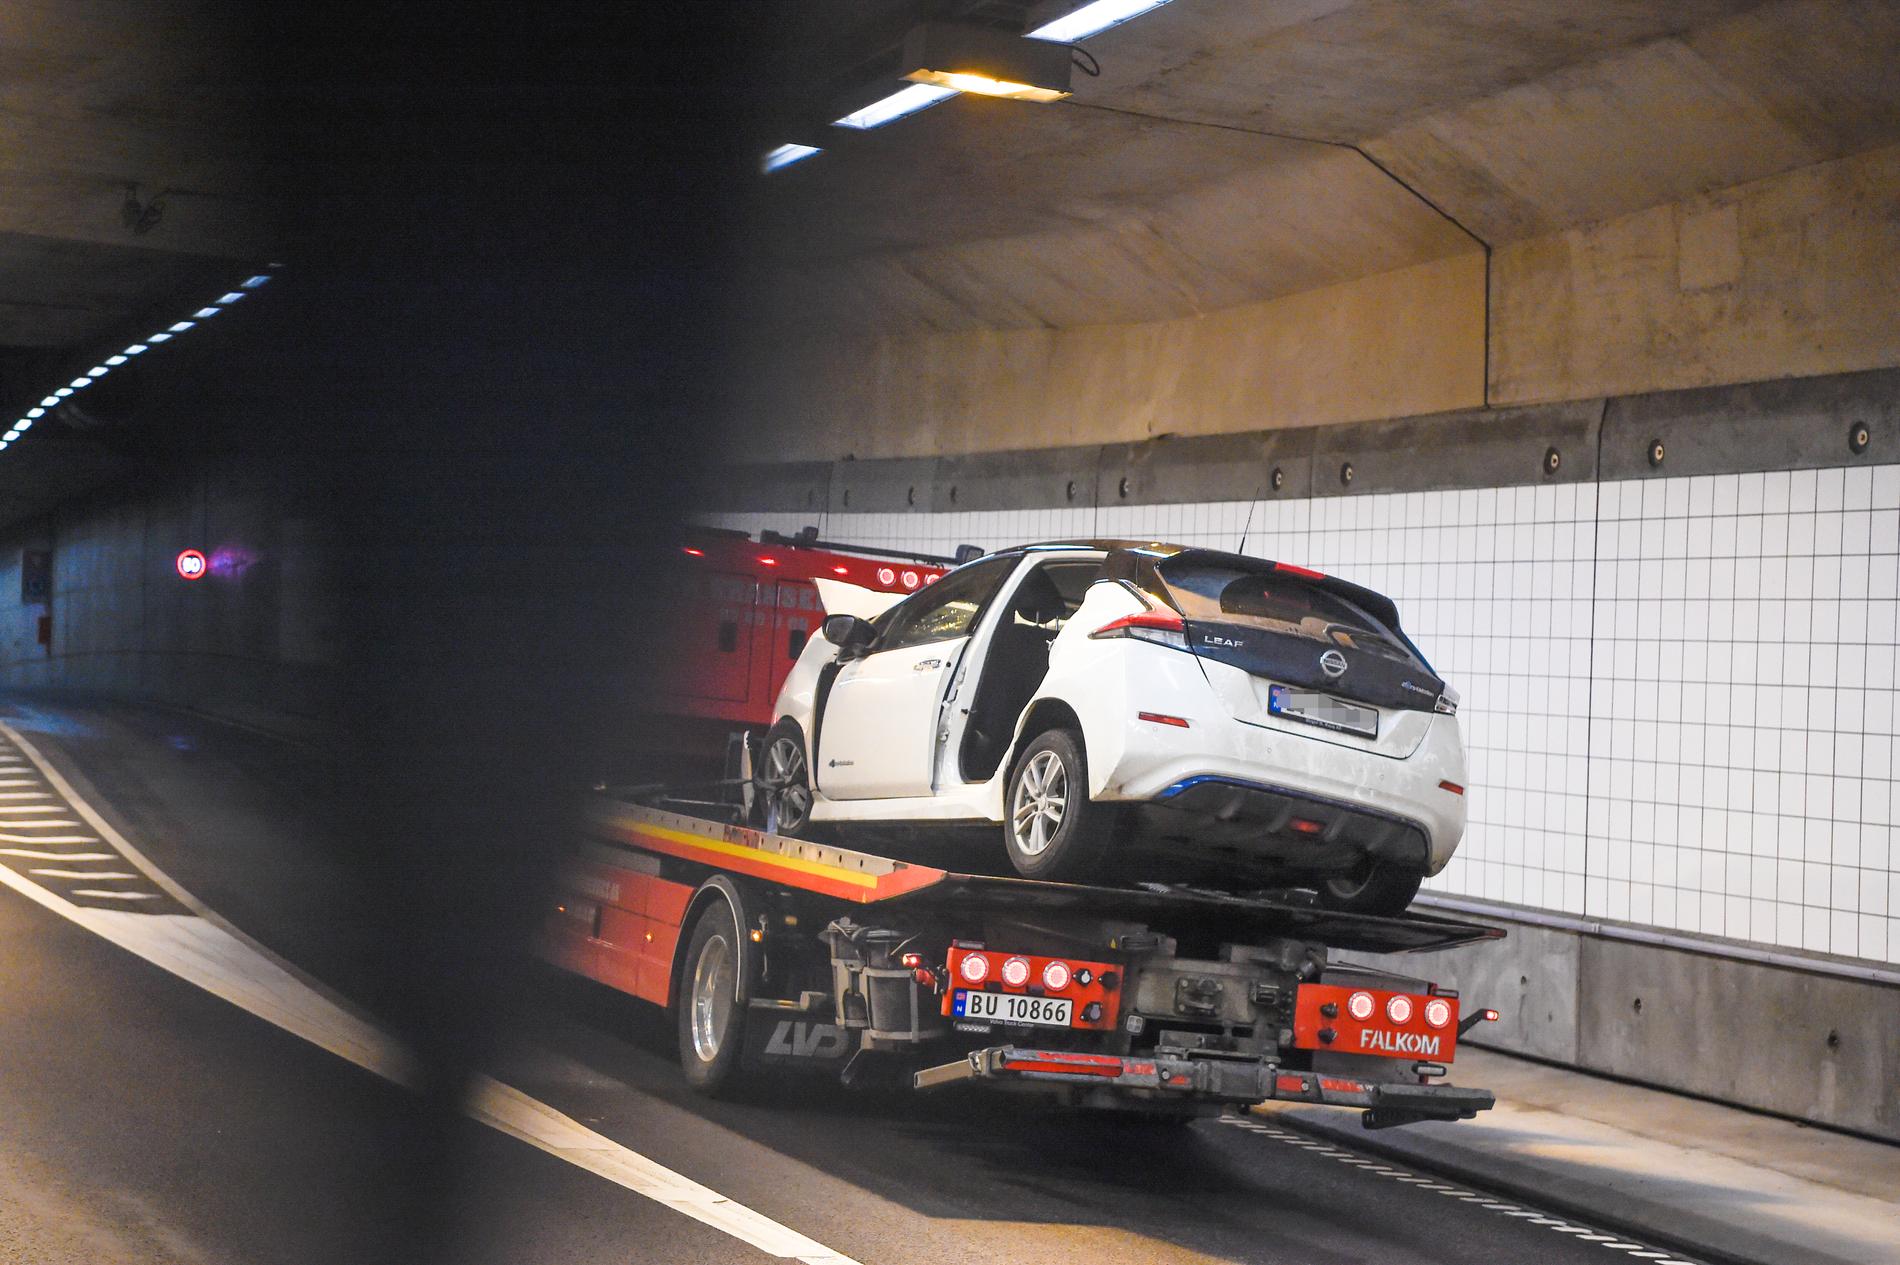 A man has been charged with negligent homicide following a fatal crash at the Opera Tunnel